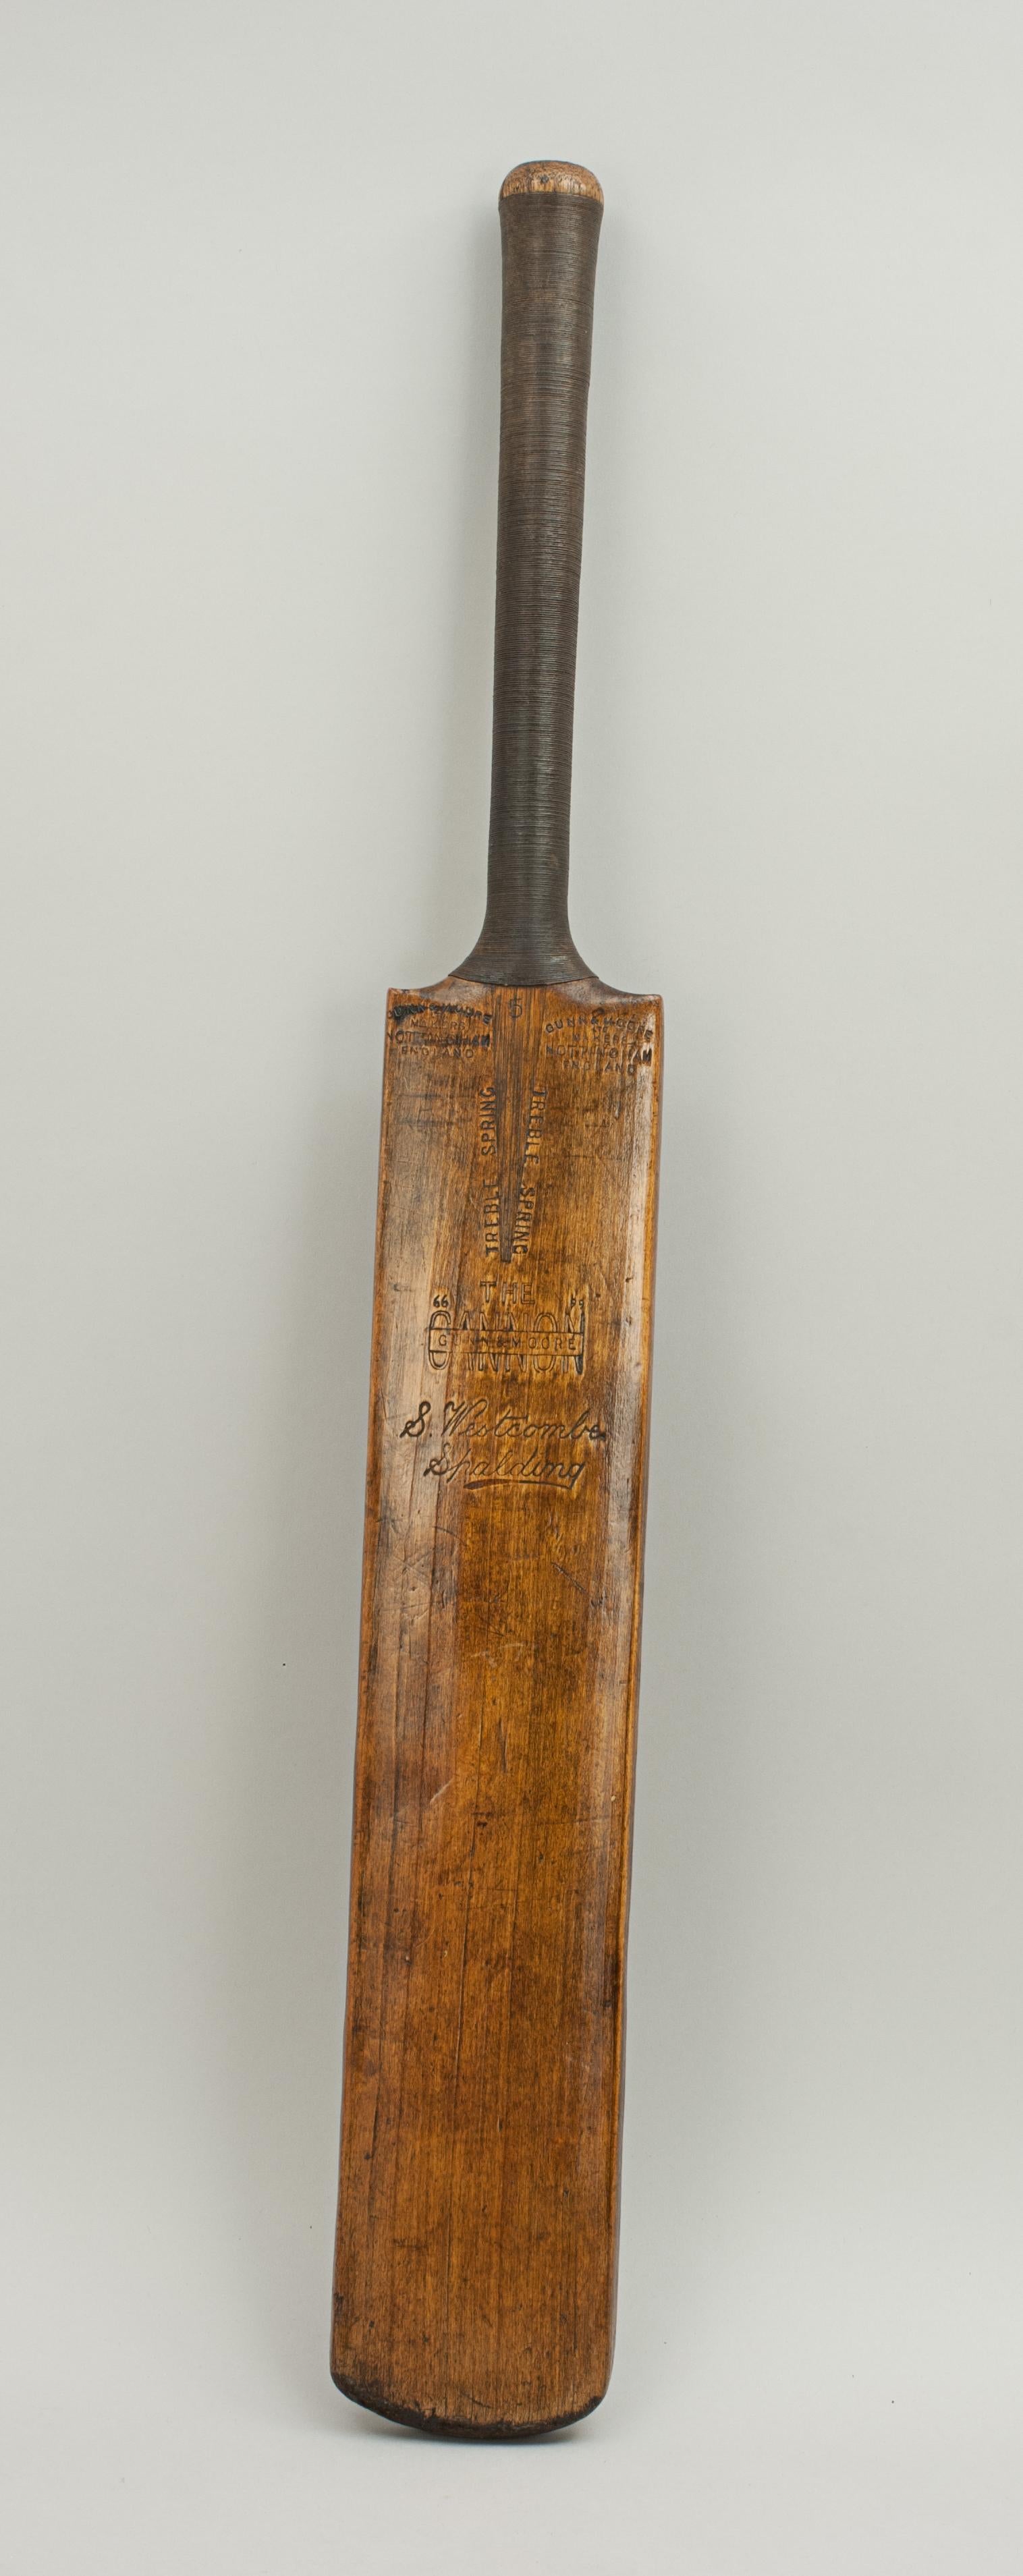 Vintage Gunn and Moore cricket bat.
A good Gunn and Moore cricket bat 'THE CANNON'. The writing on the two shoulders reads: 'GUN & MOORE Ltd, MAKERS, NOTTINGHAM, ENGLAND', whilst on the blade 'TREBLE SPRING, 'THE CANNON', S. Westcombe, Spalding'.